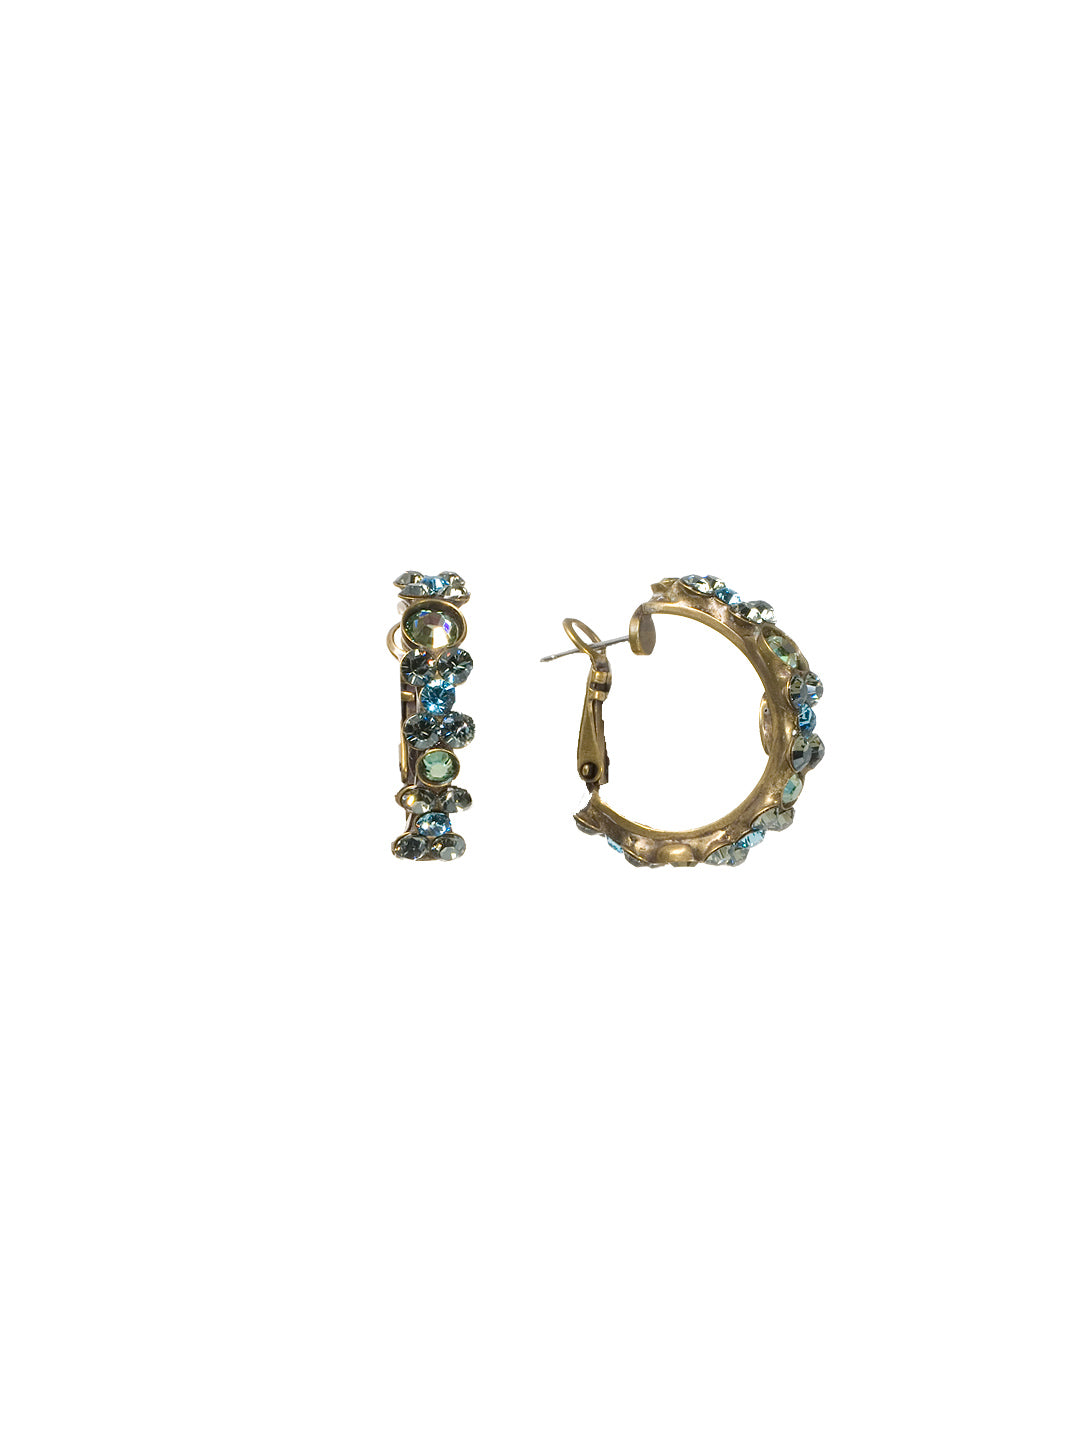 Floral Hoop Earrings - EBP15AGAQB - <p>Intricate design, infused with gorgeous shine. A motif of floral clusters is featured here on a small, delicate hoop with a hinged post backing. From Sorrelli's Aqua Bubbles collection in our Antique Gold-tone finish.</p>